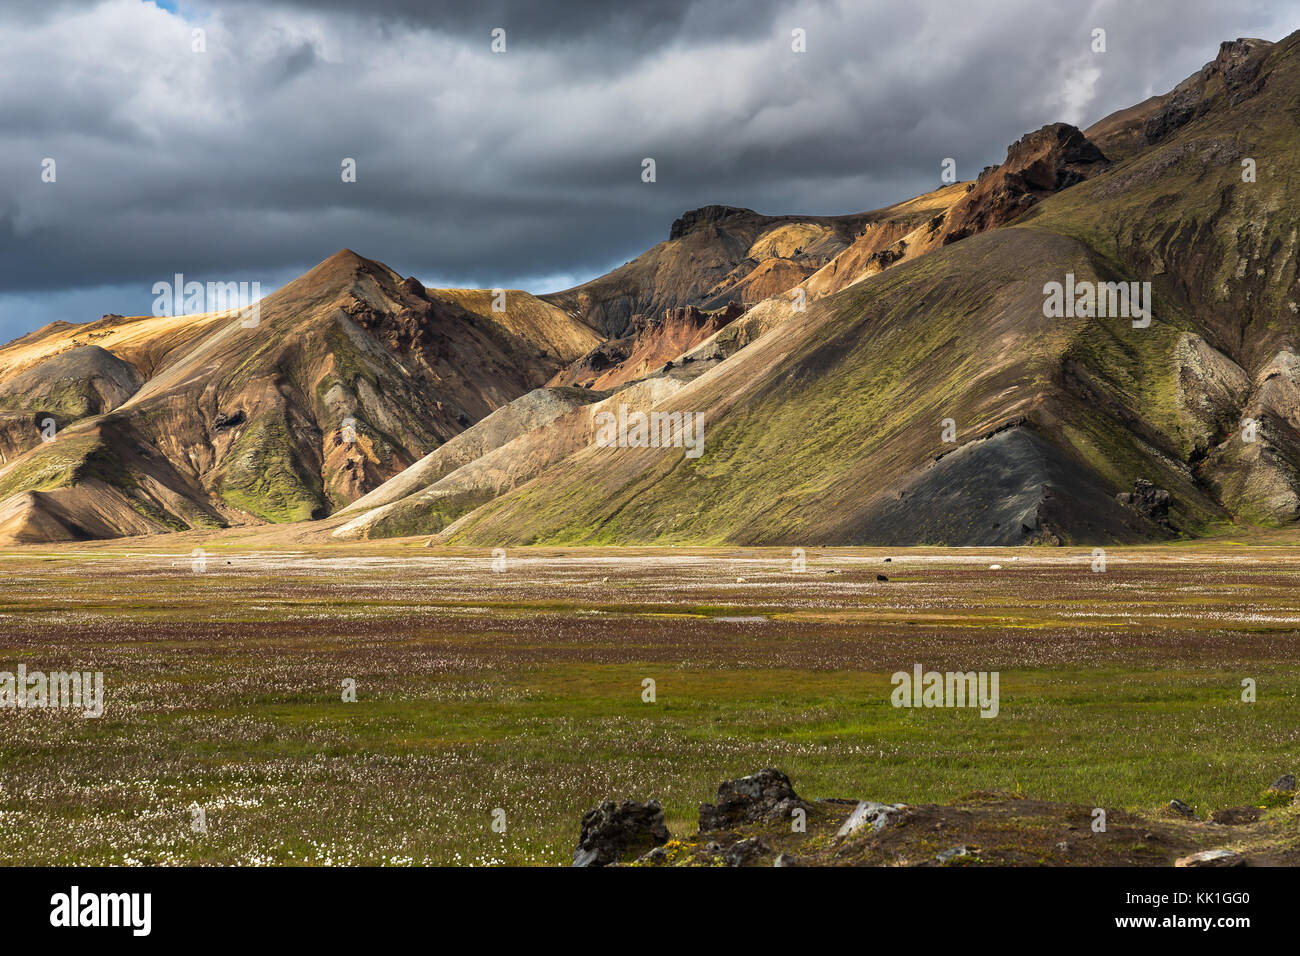 Landmannalaugar is a place in the Fjallabak Nature Reserve in the Highlands of Iceland. It is at the edge of Laugahraun lava field, which was formed i Stock Photo